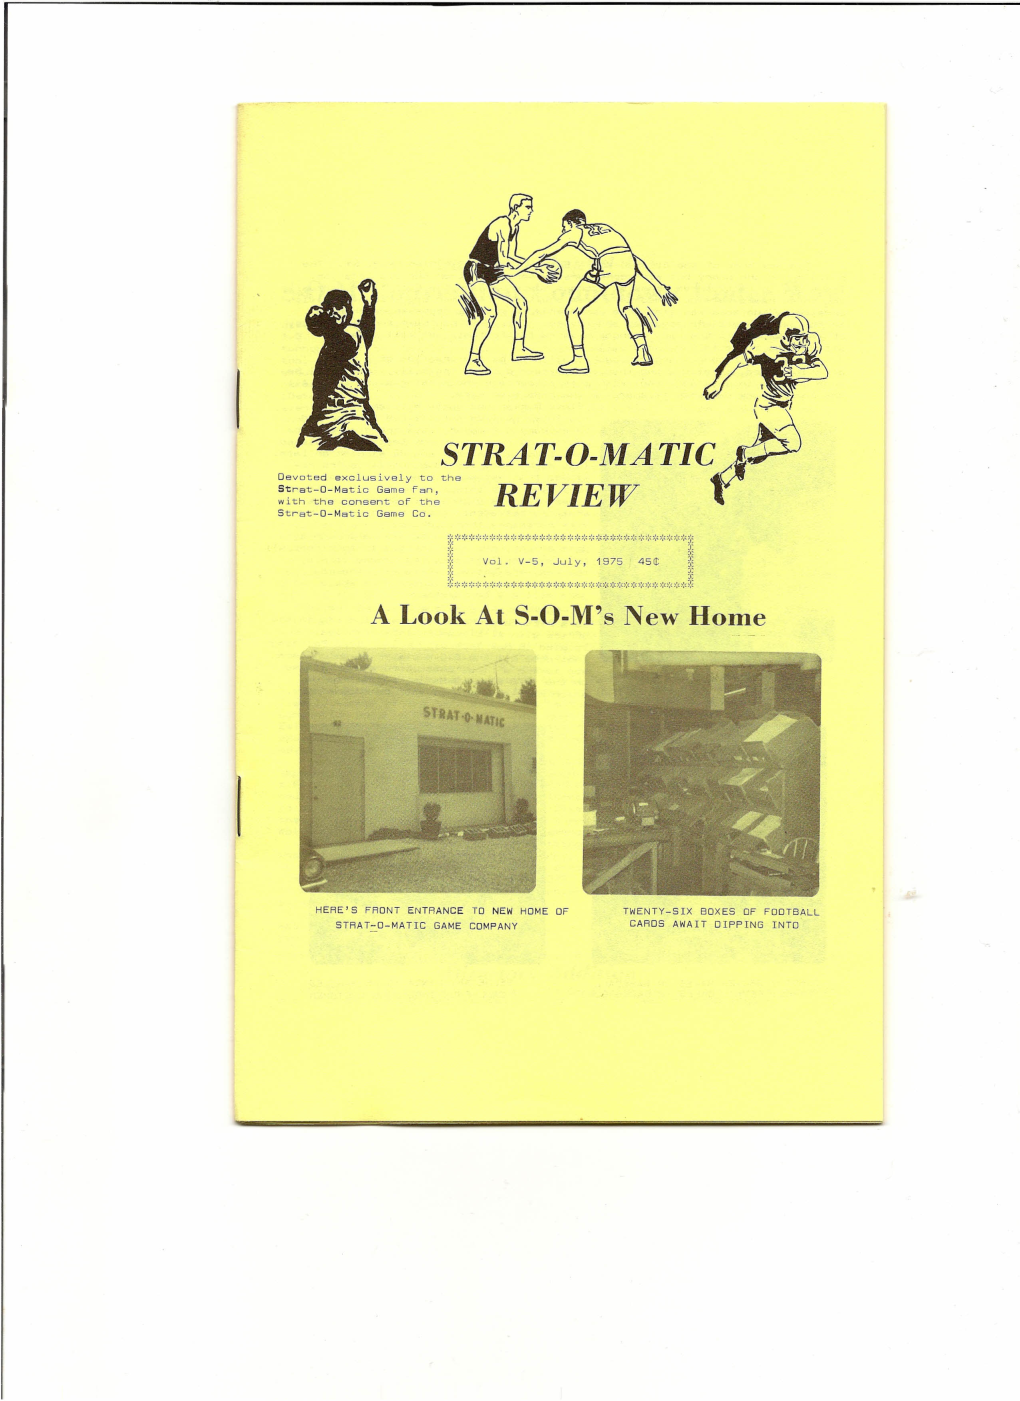 Strat-O-Matic Game Co